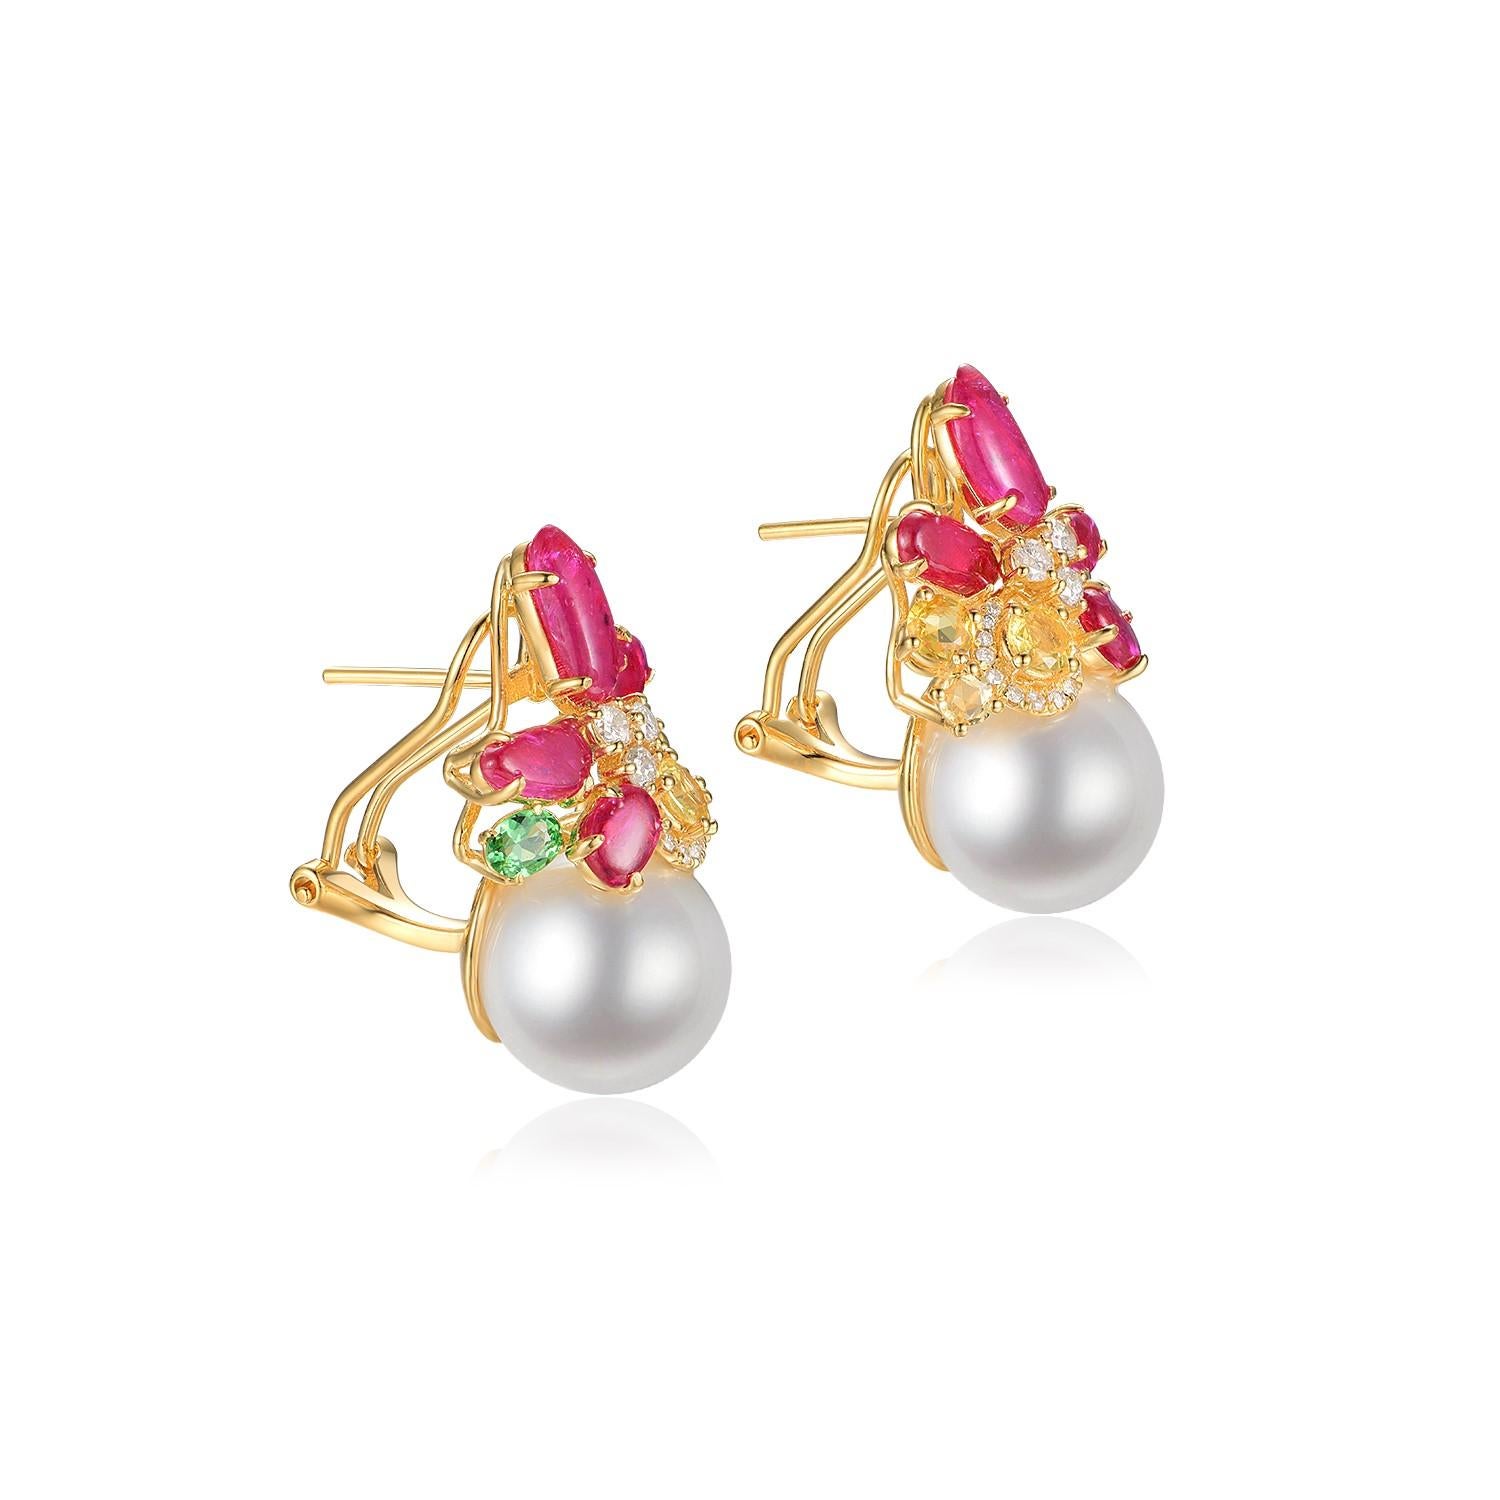 Set against the backdrop of 18K gold vermeil over sterling silver, these earrings are a luxurious blend of color and radiance. Each piece is crowned with an 11.8mm South Sea pearl, the centerpiece known for its impressive size and lustrous sheen